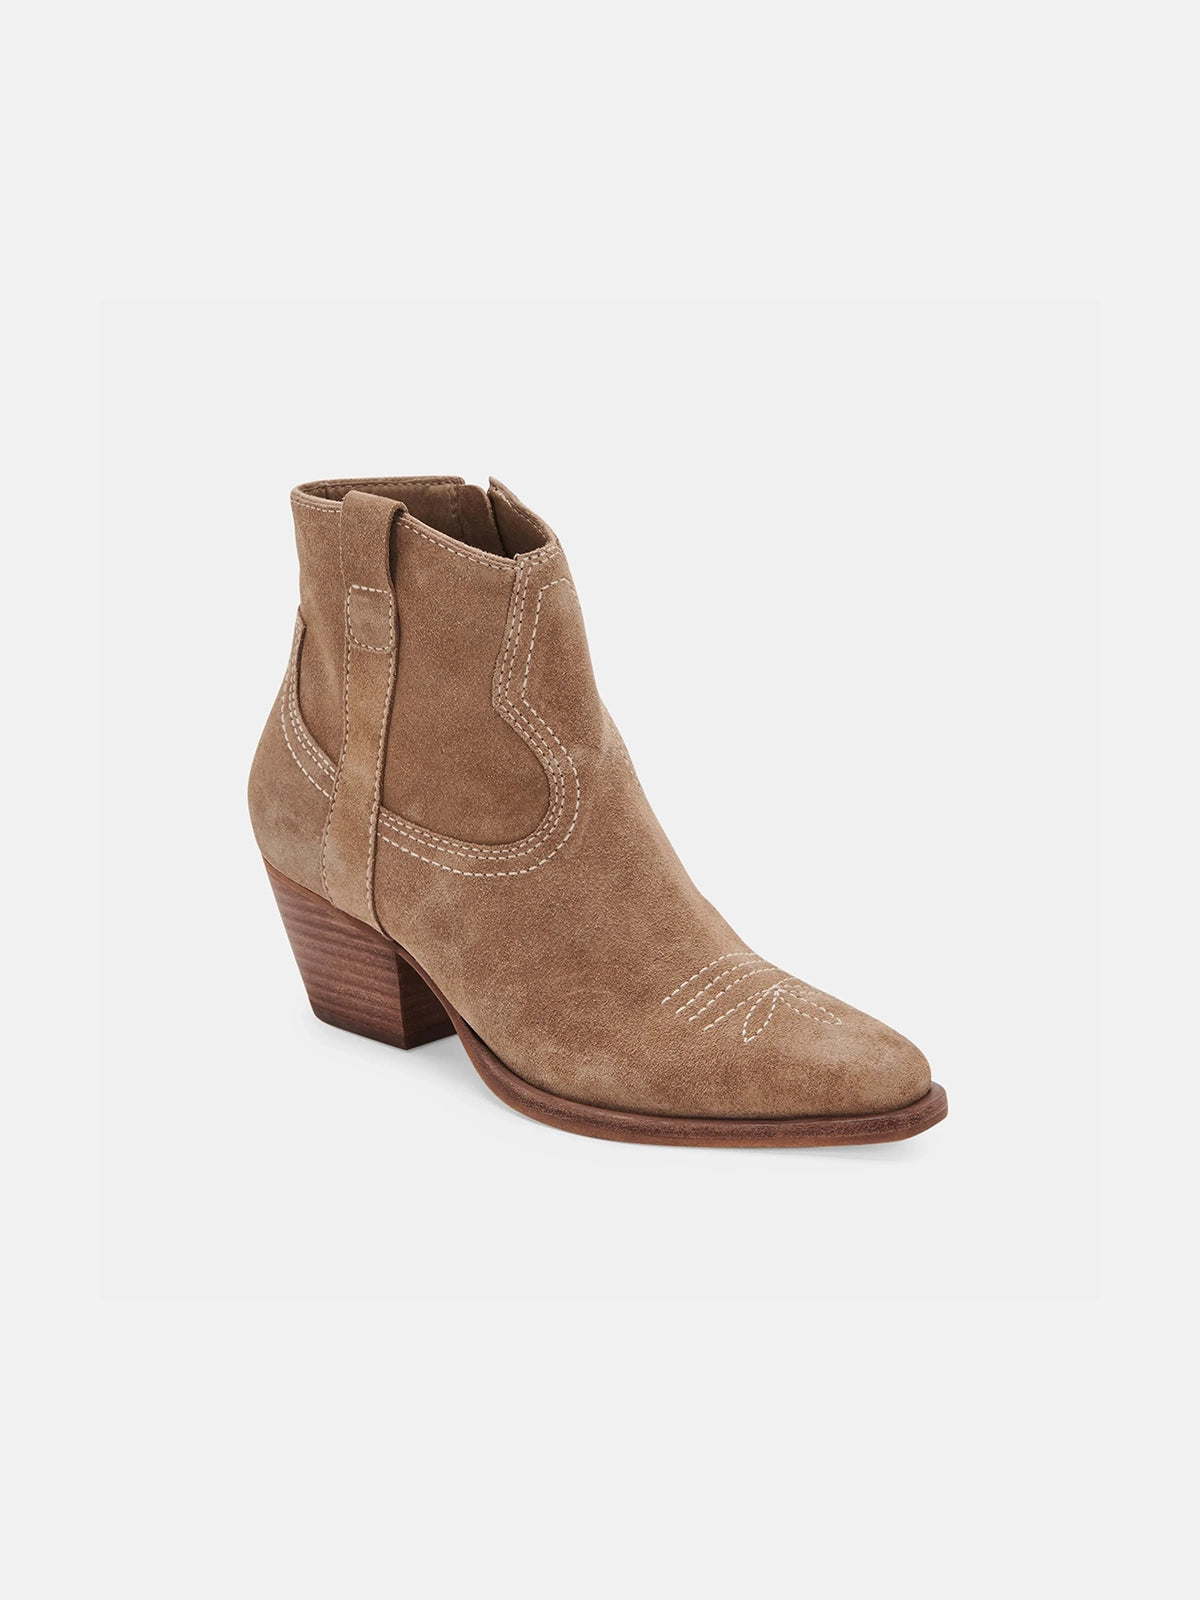 dolce vita silma bootie in truffle suede